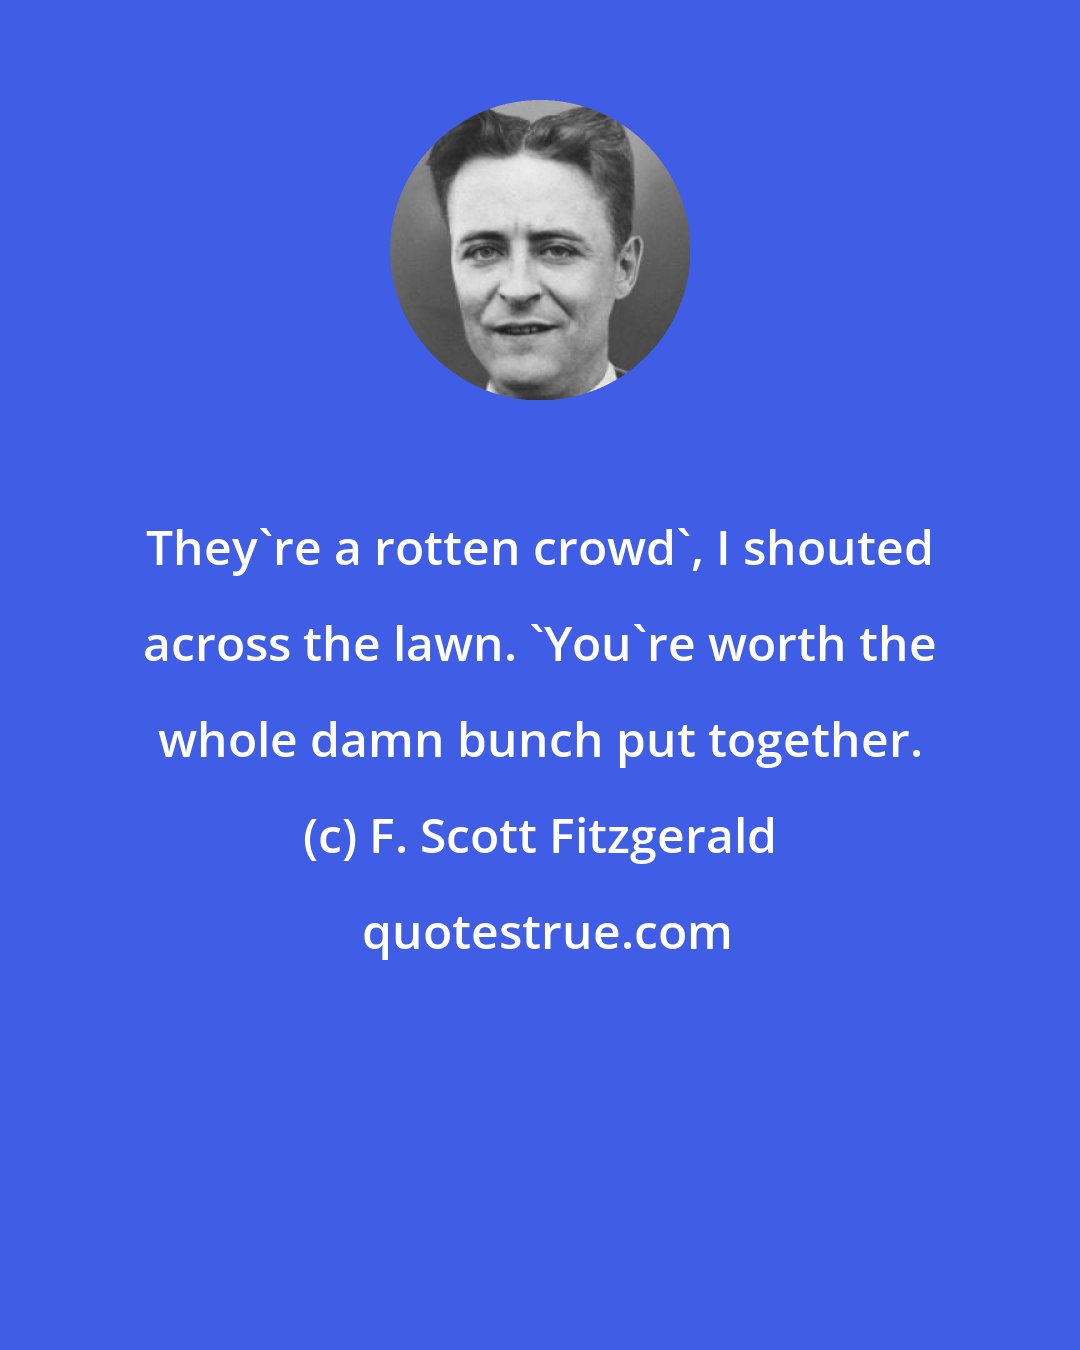 F. Scott Fitzgerald: They're a rotten crowd', I shouted across the lawn. 'You're worth the whole damn bunch put together.